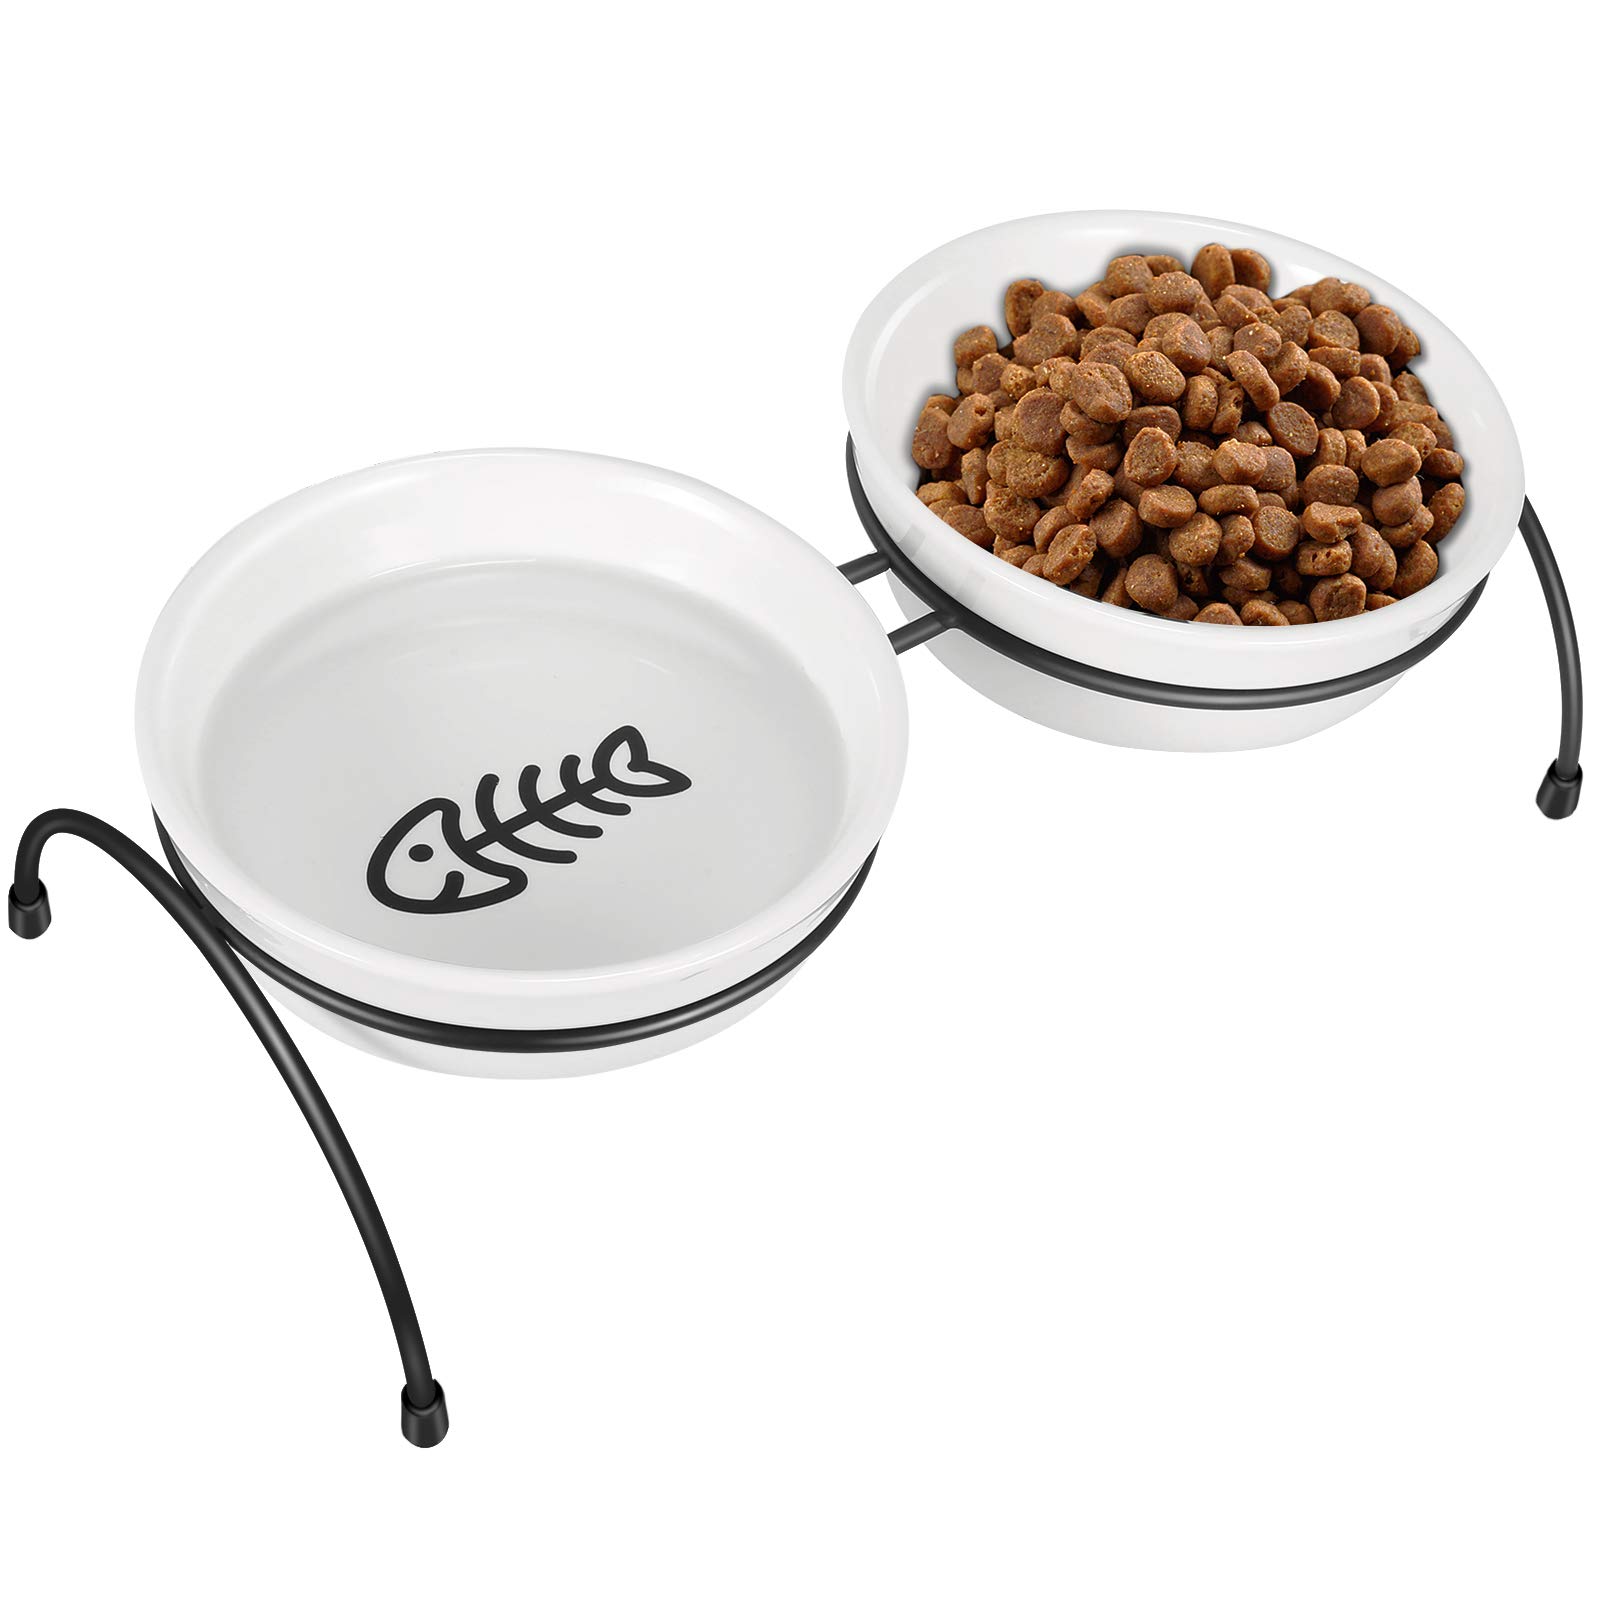 COMESOON Cat Bowls - Raised Cat Bowls for Food and Water